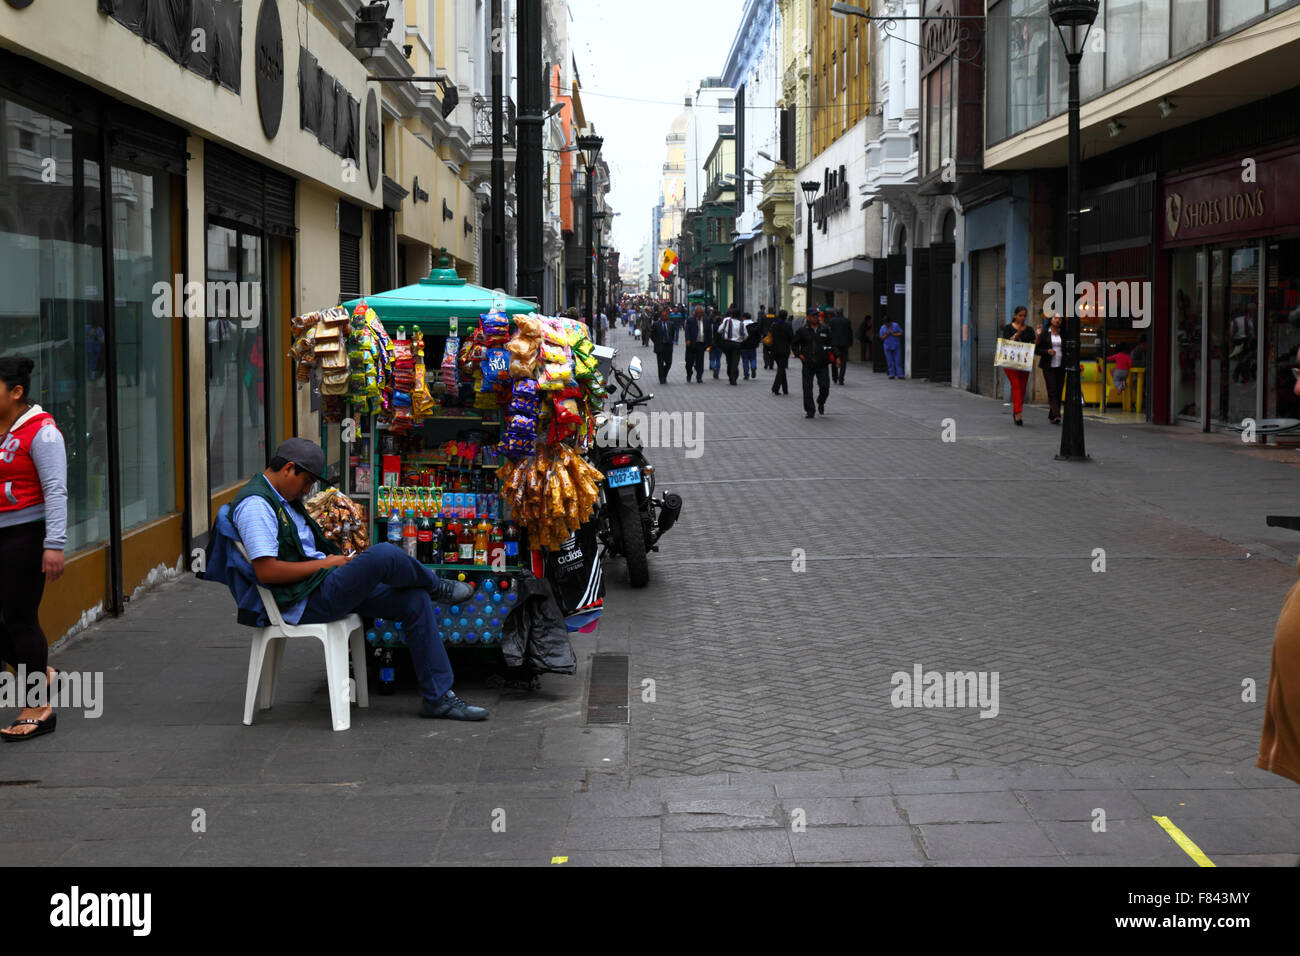 Street vendor and stall in Jiron Union street, central Lima, Peru Stock Photo